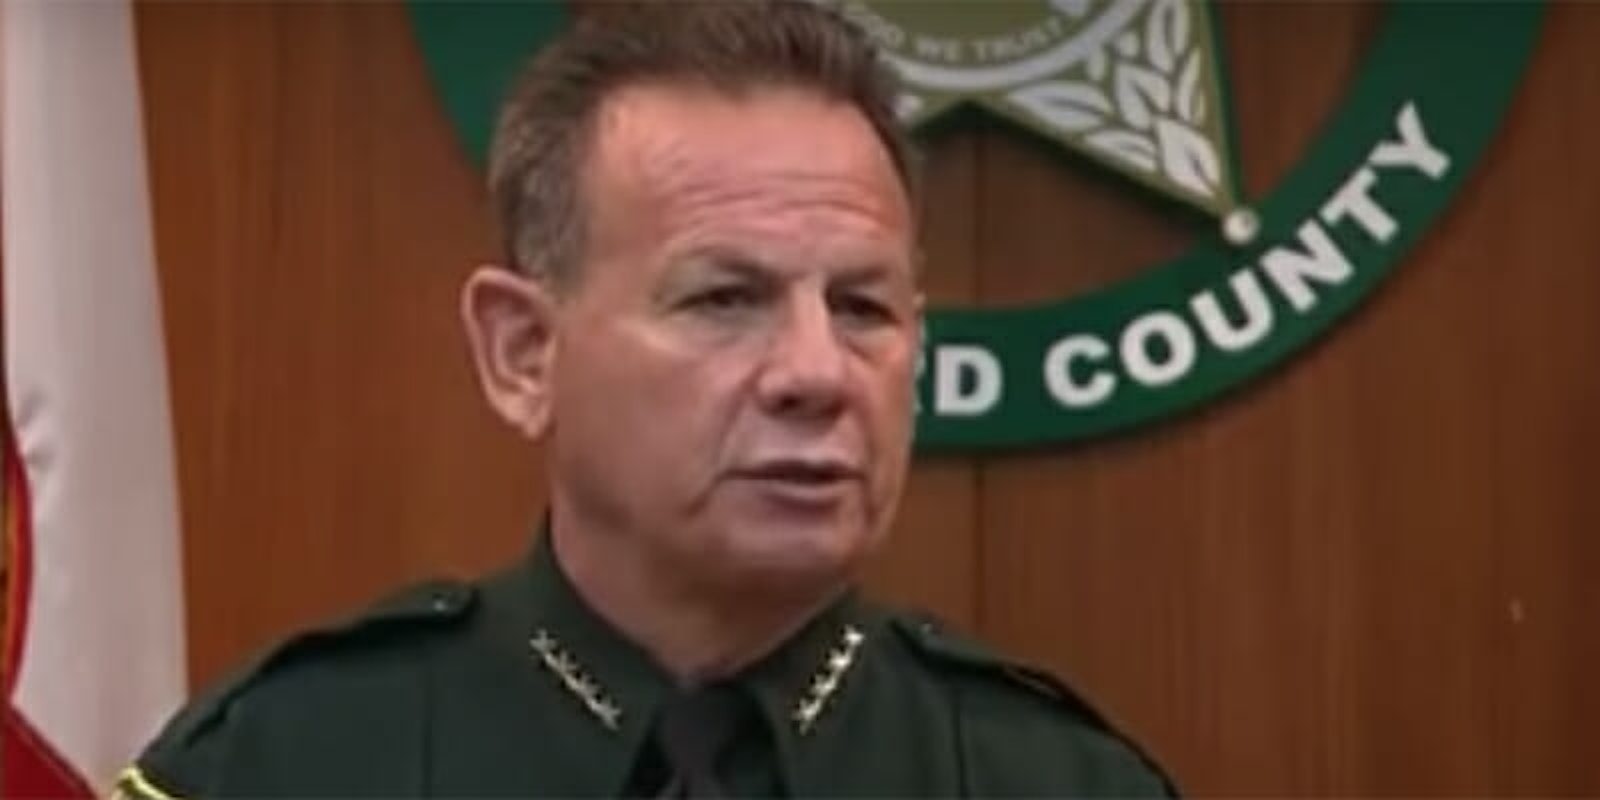 After Broward County Sheriff Scott Israel reported that the armed deputy at a Florida high school 'did nothing' during a mass shooting, armed police are guarding the deputy's home.